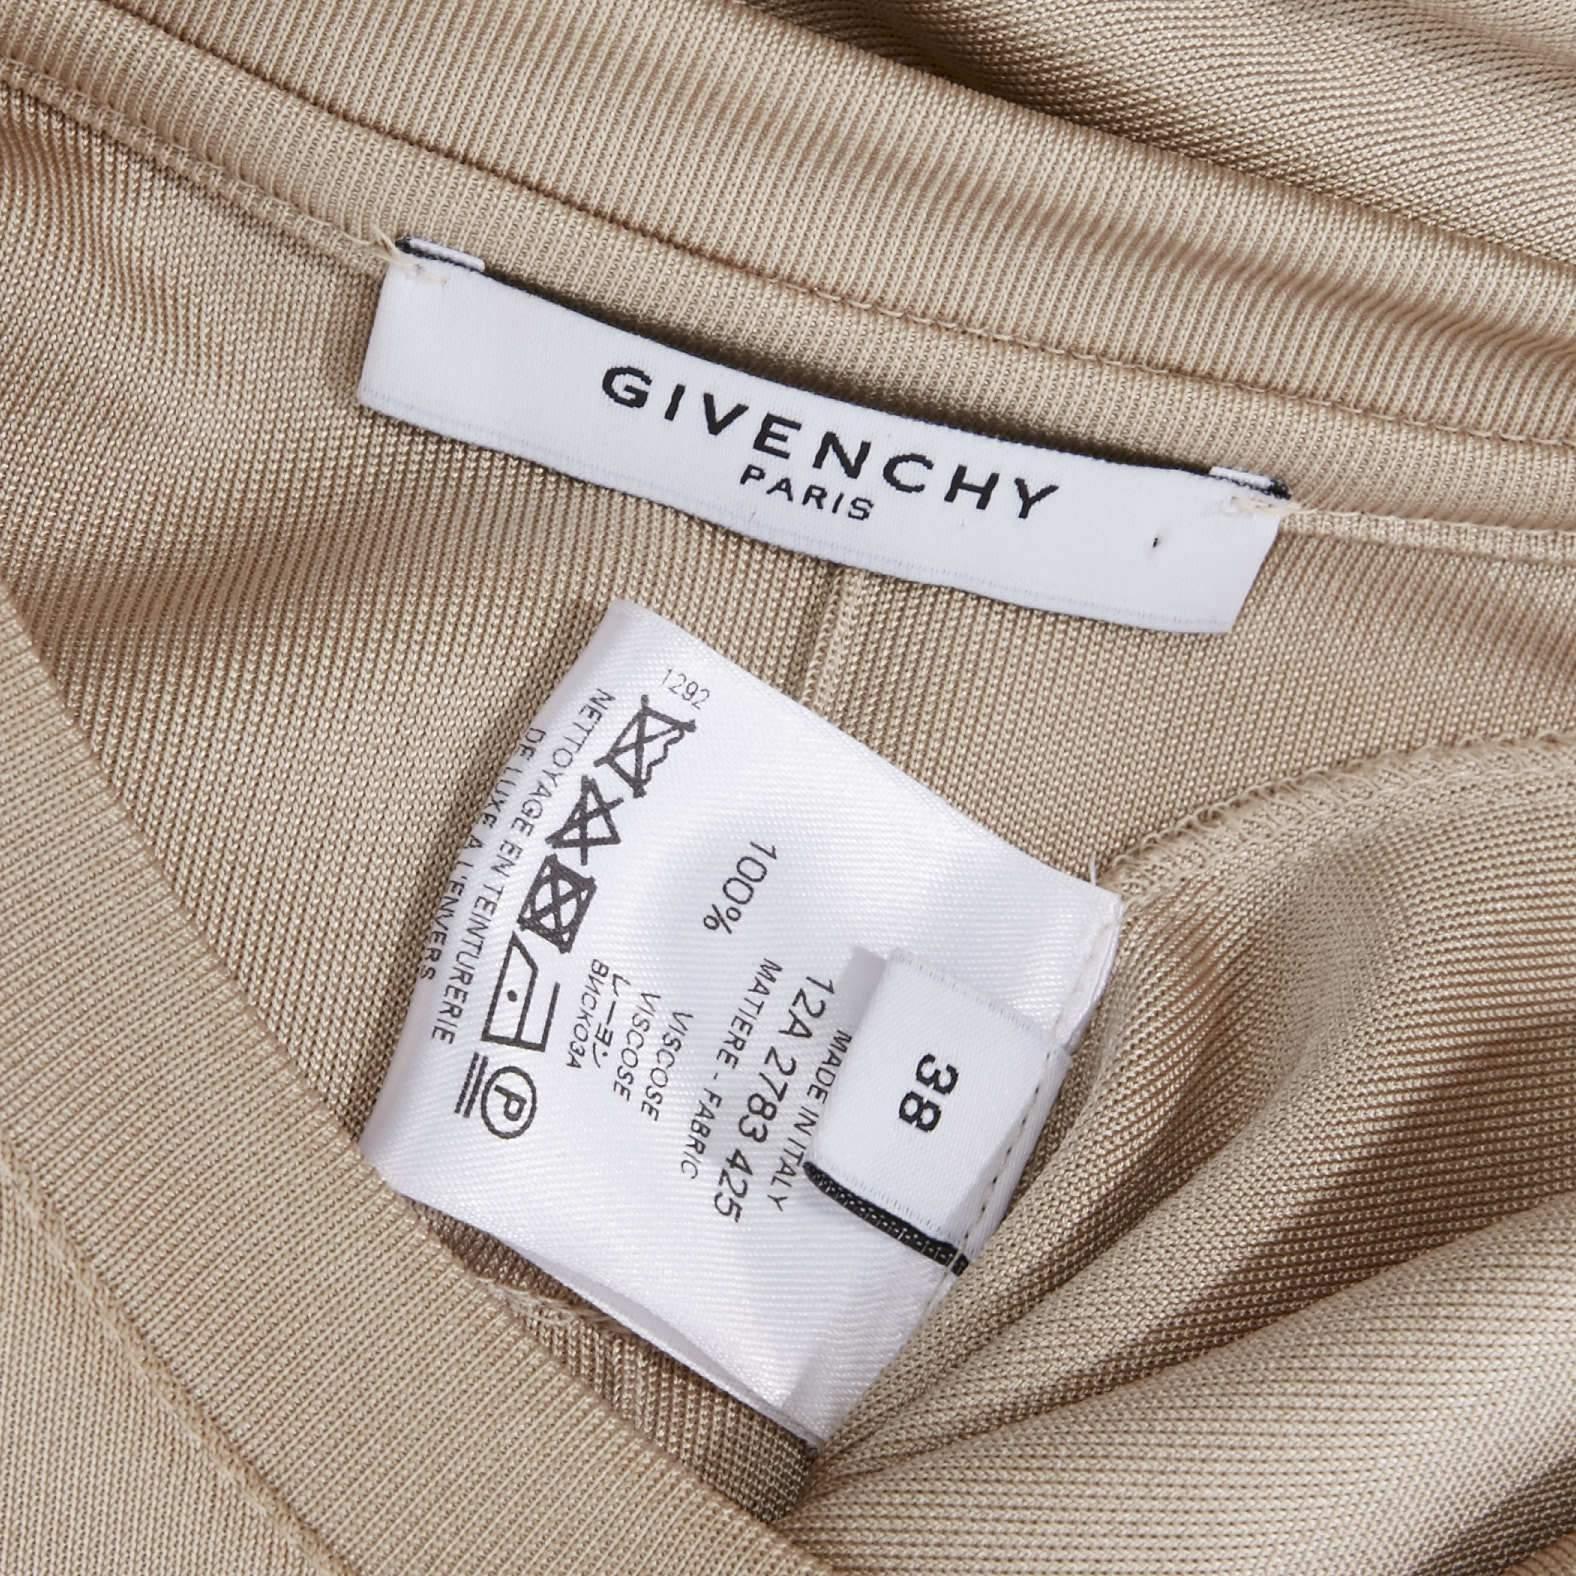 GIVENCHY TISCI beige nude viscose loose tshirt maxi skirt design dress gown FR38 5